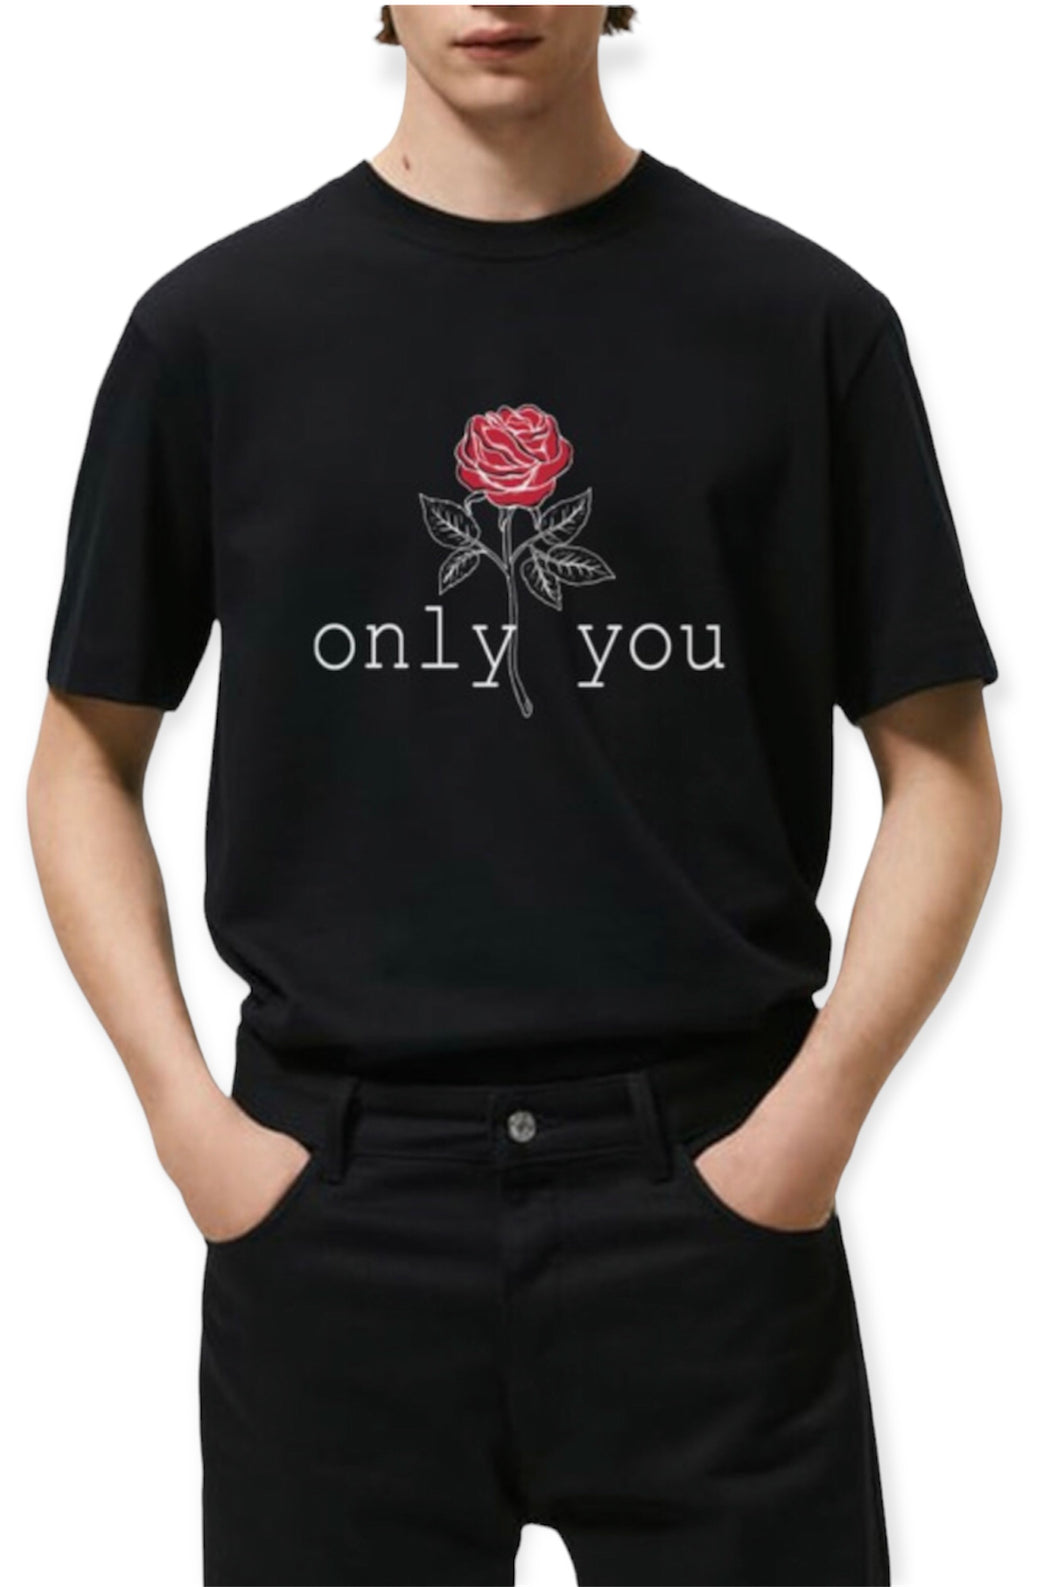 Only You Tee